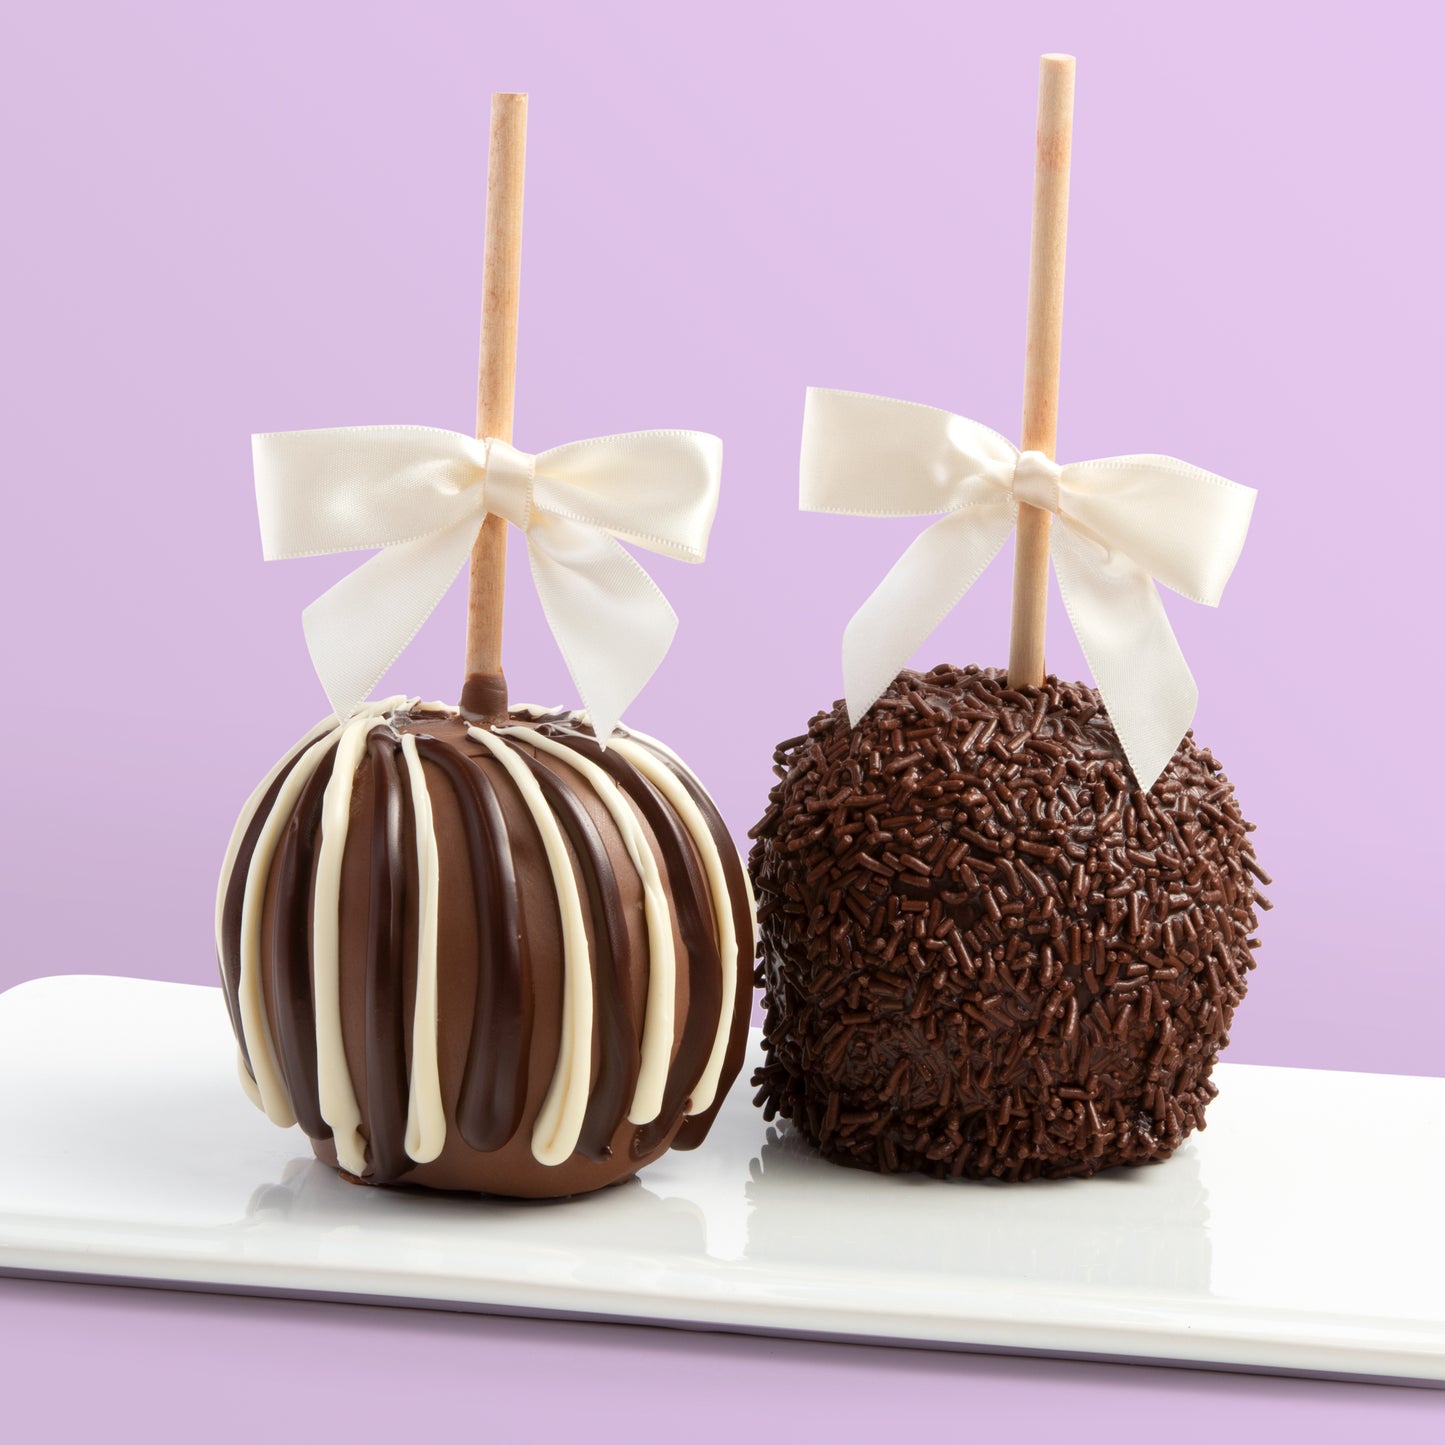 Apple Lover's Delight Chocolate Covered Apples